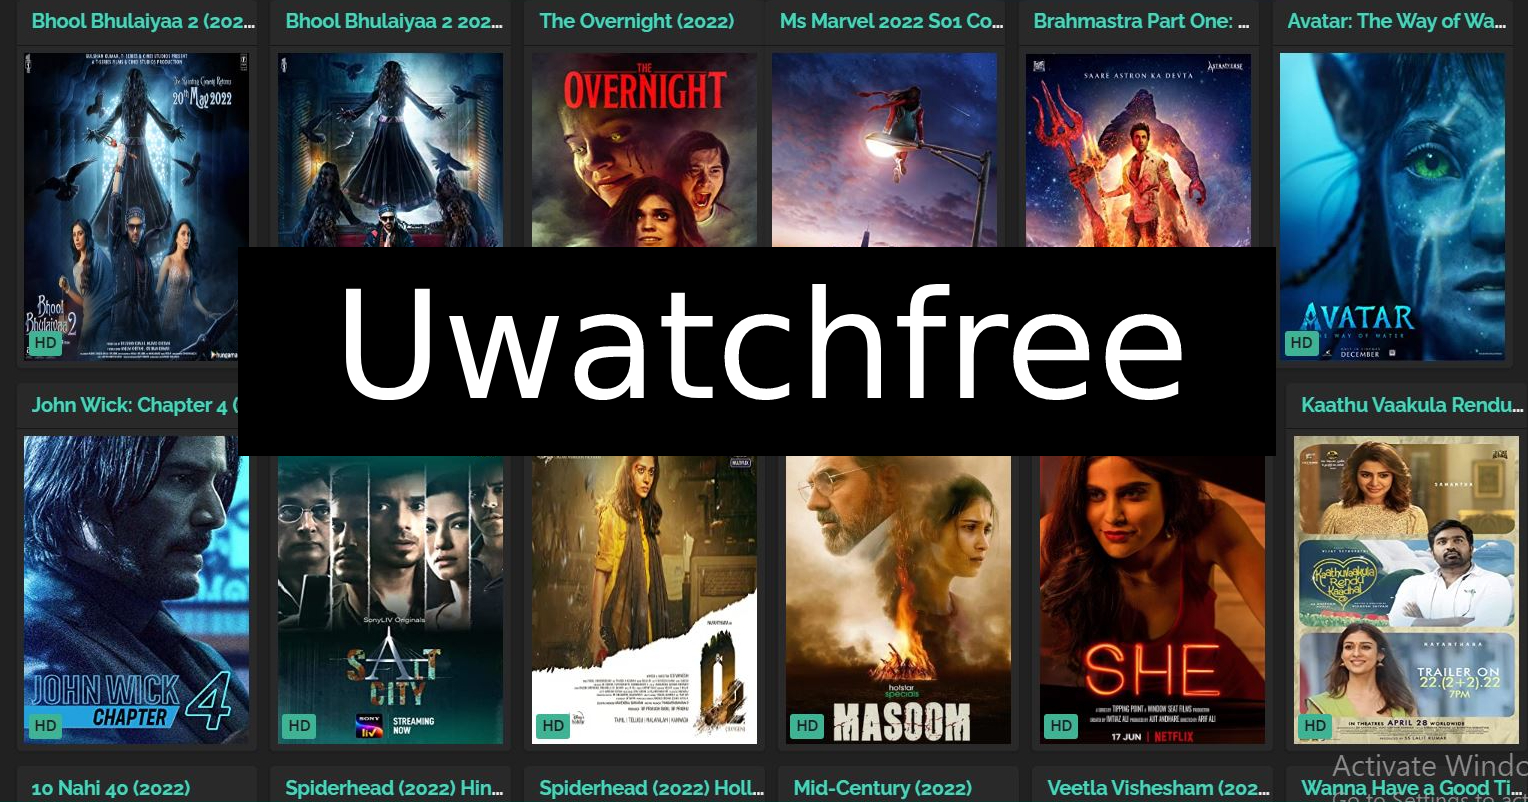 How Can I Download Uwatchfree App/APK?